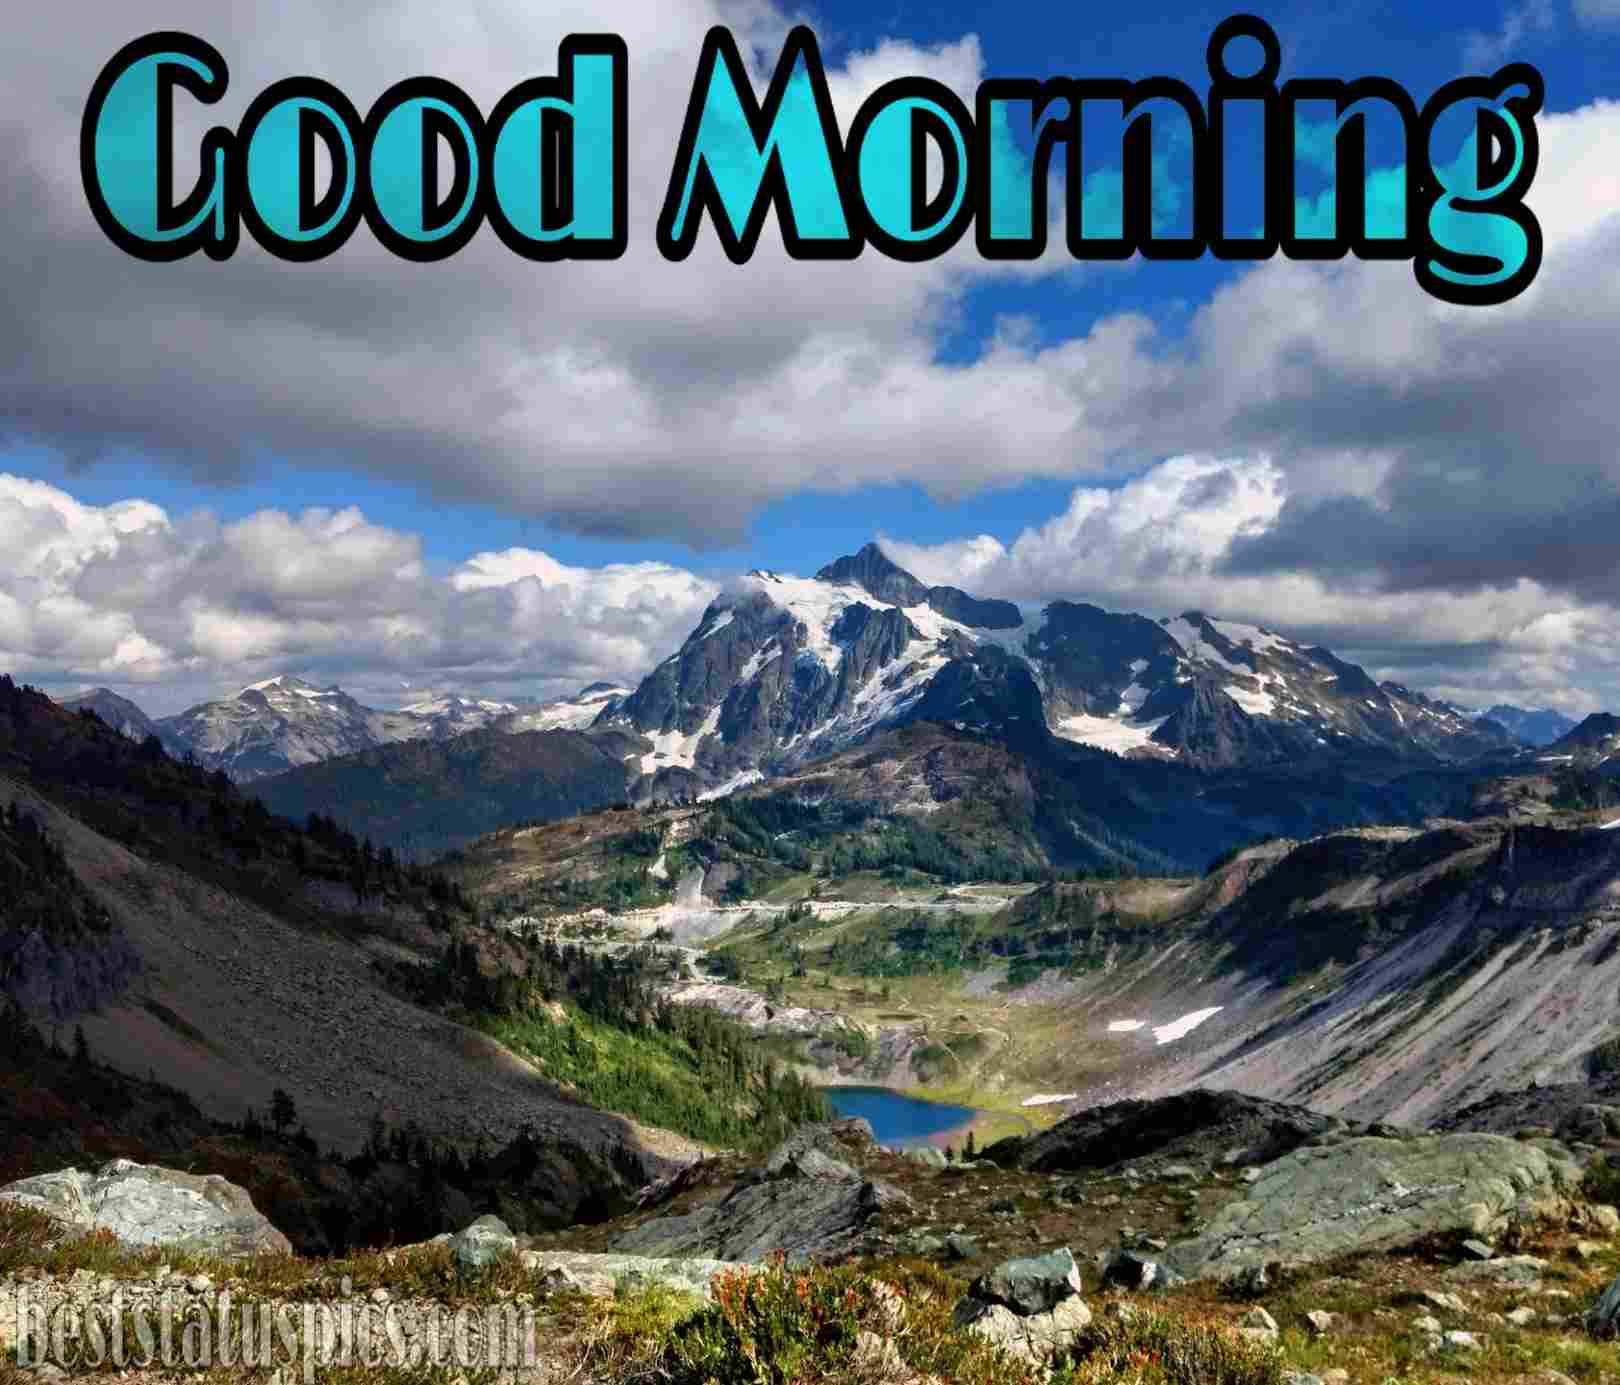 Good Morning Mountain Images HD For WhatsApp